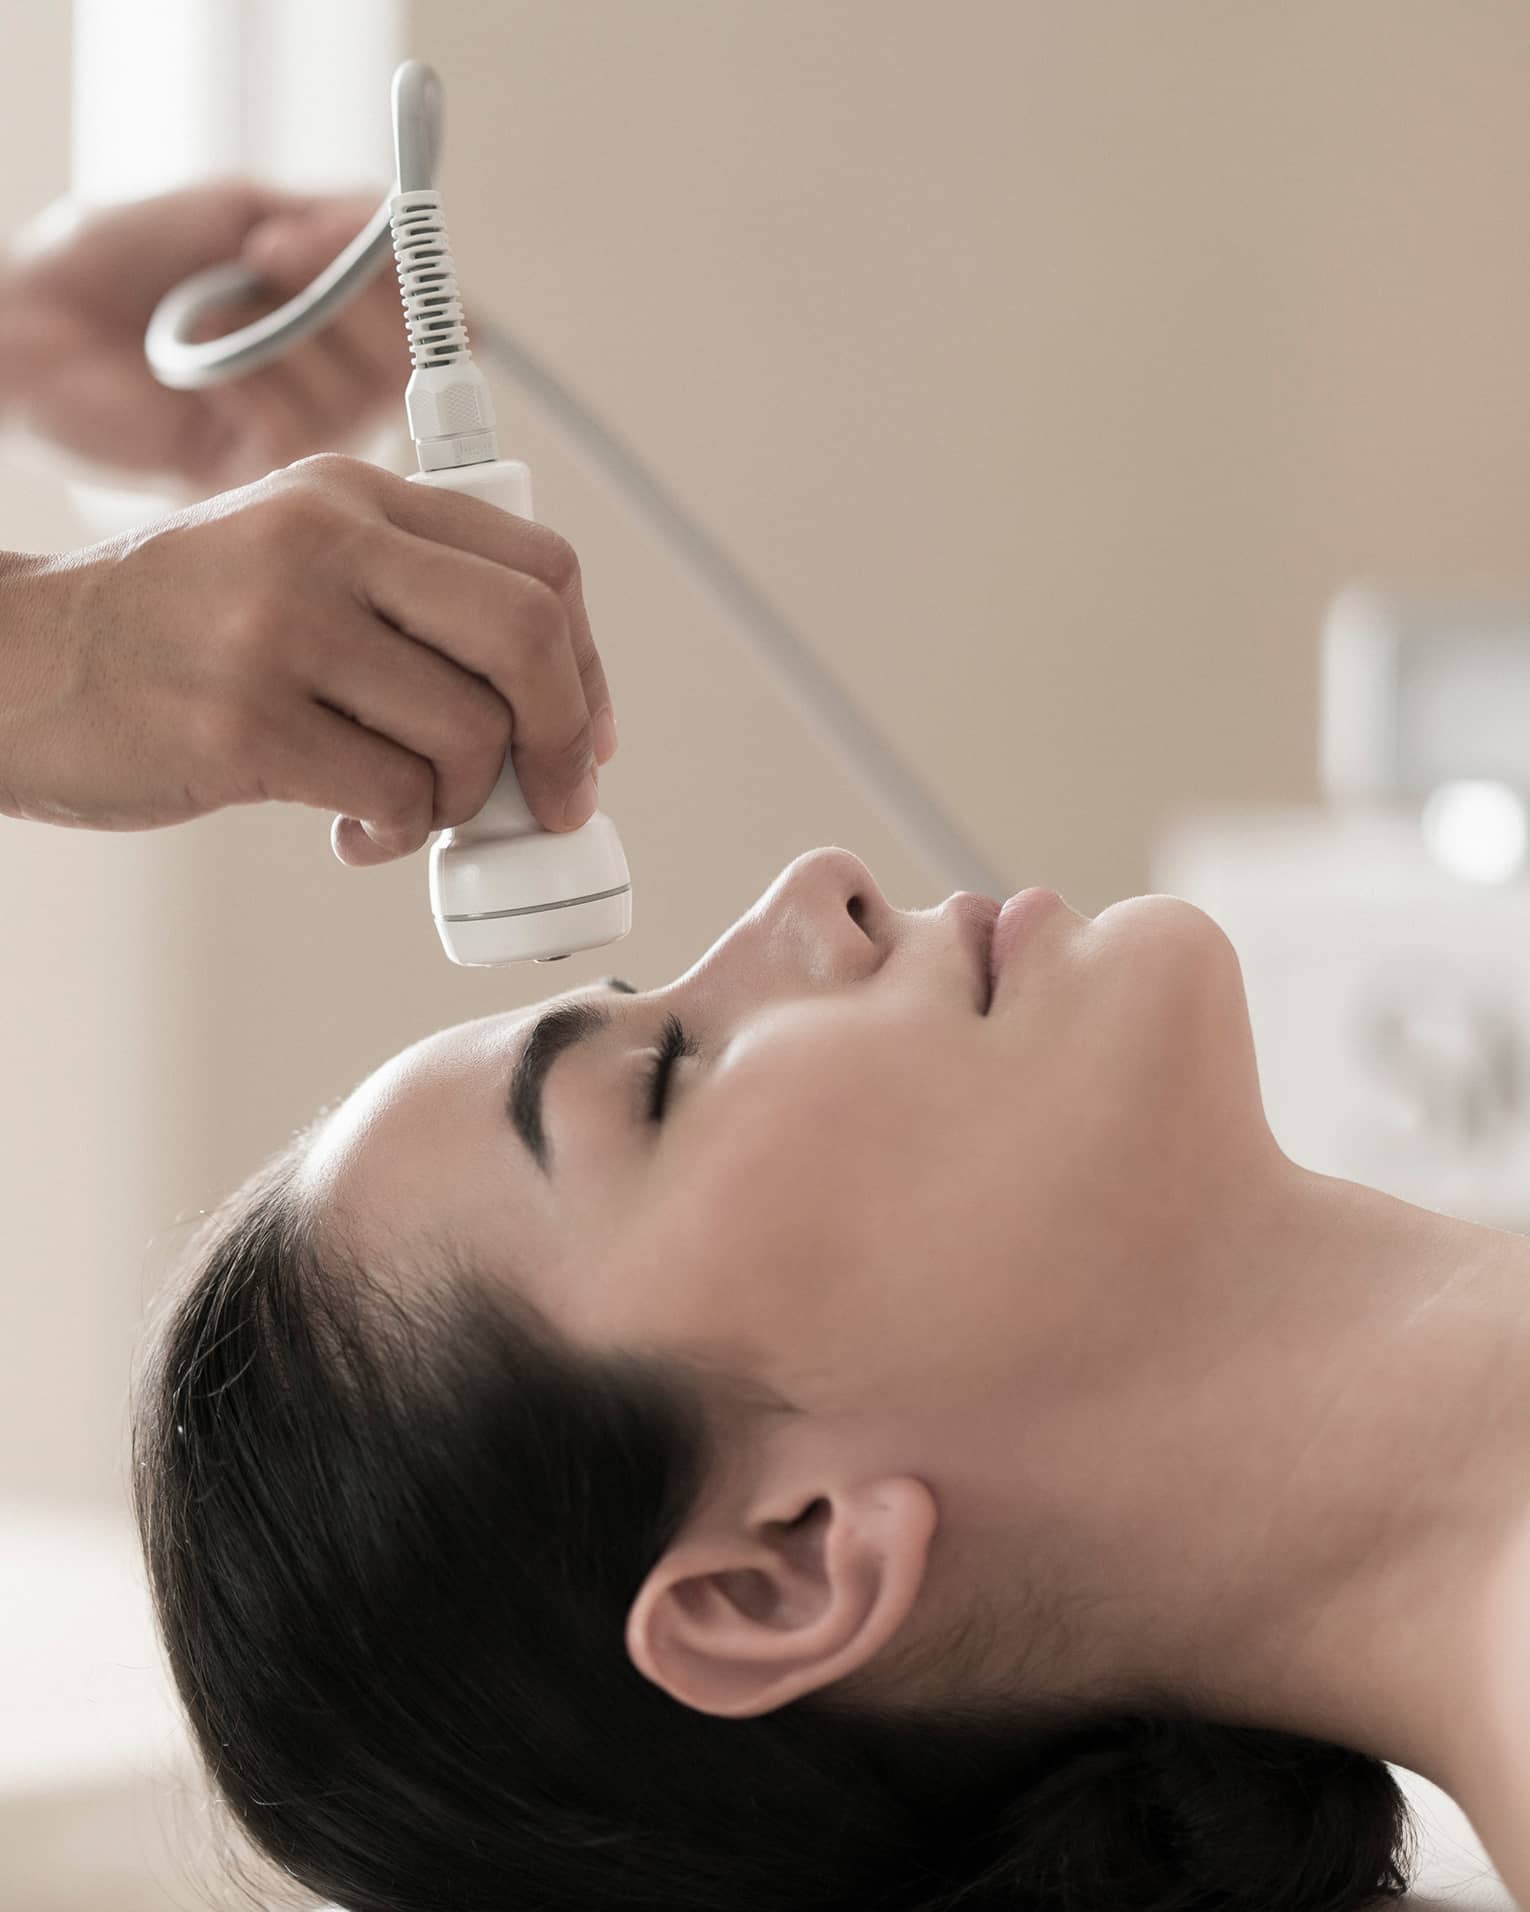 Spa attendant applies a facial to a guest